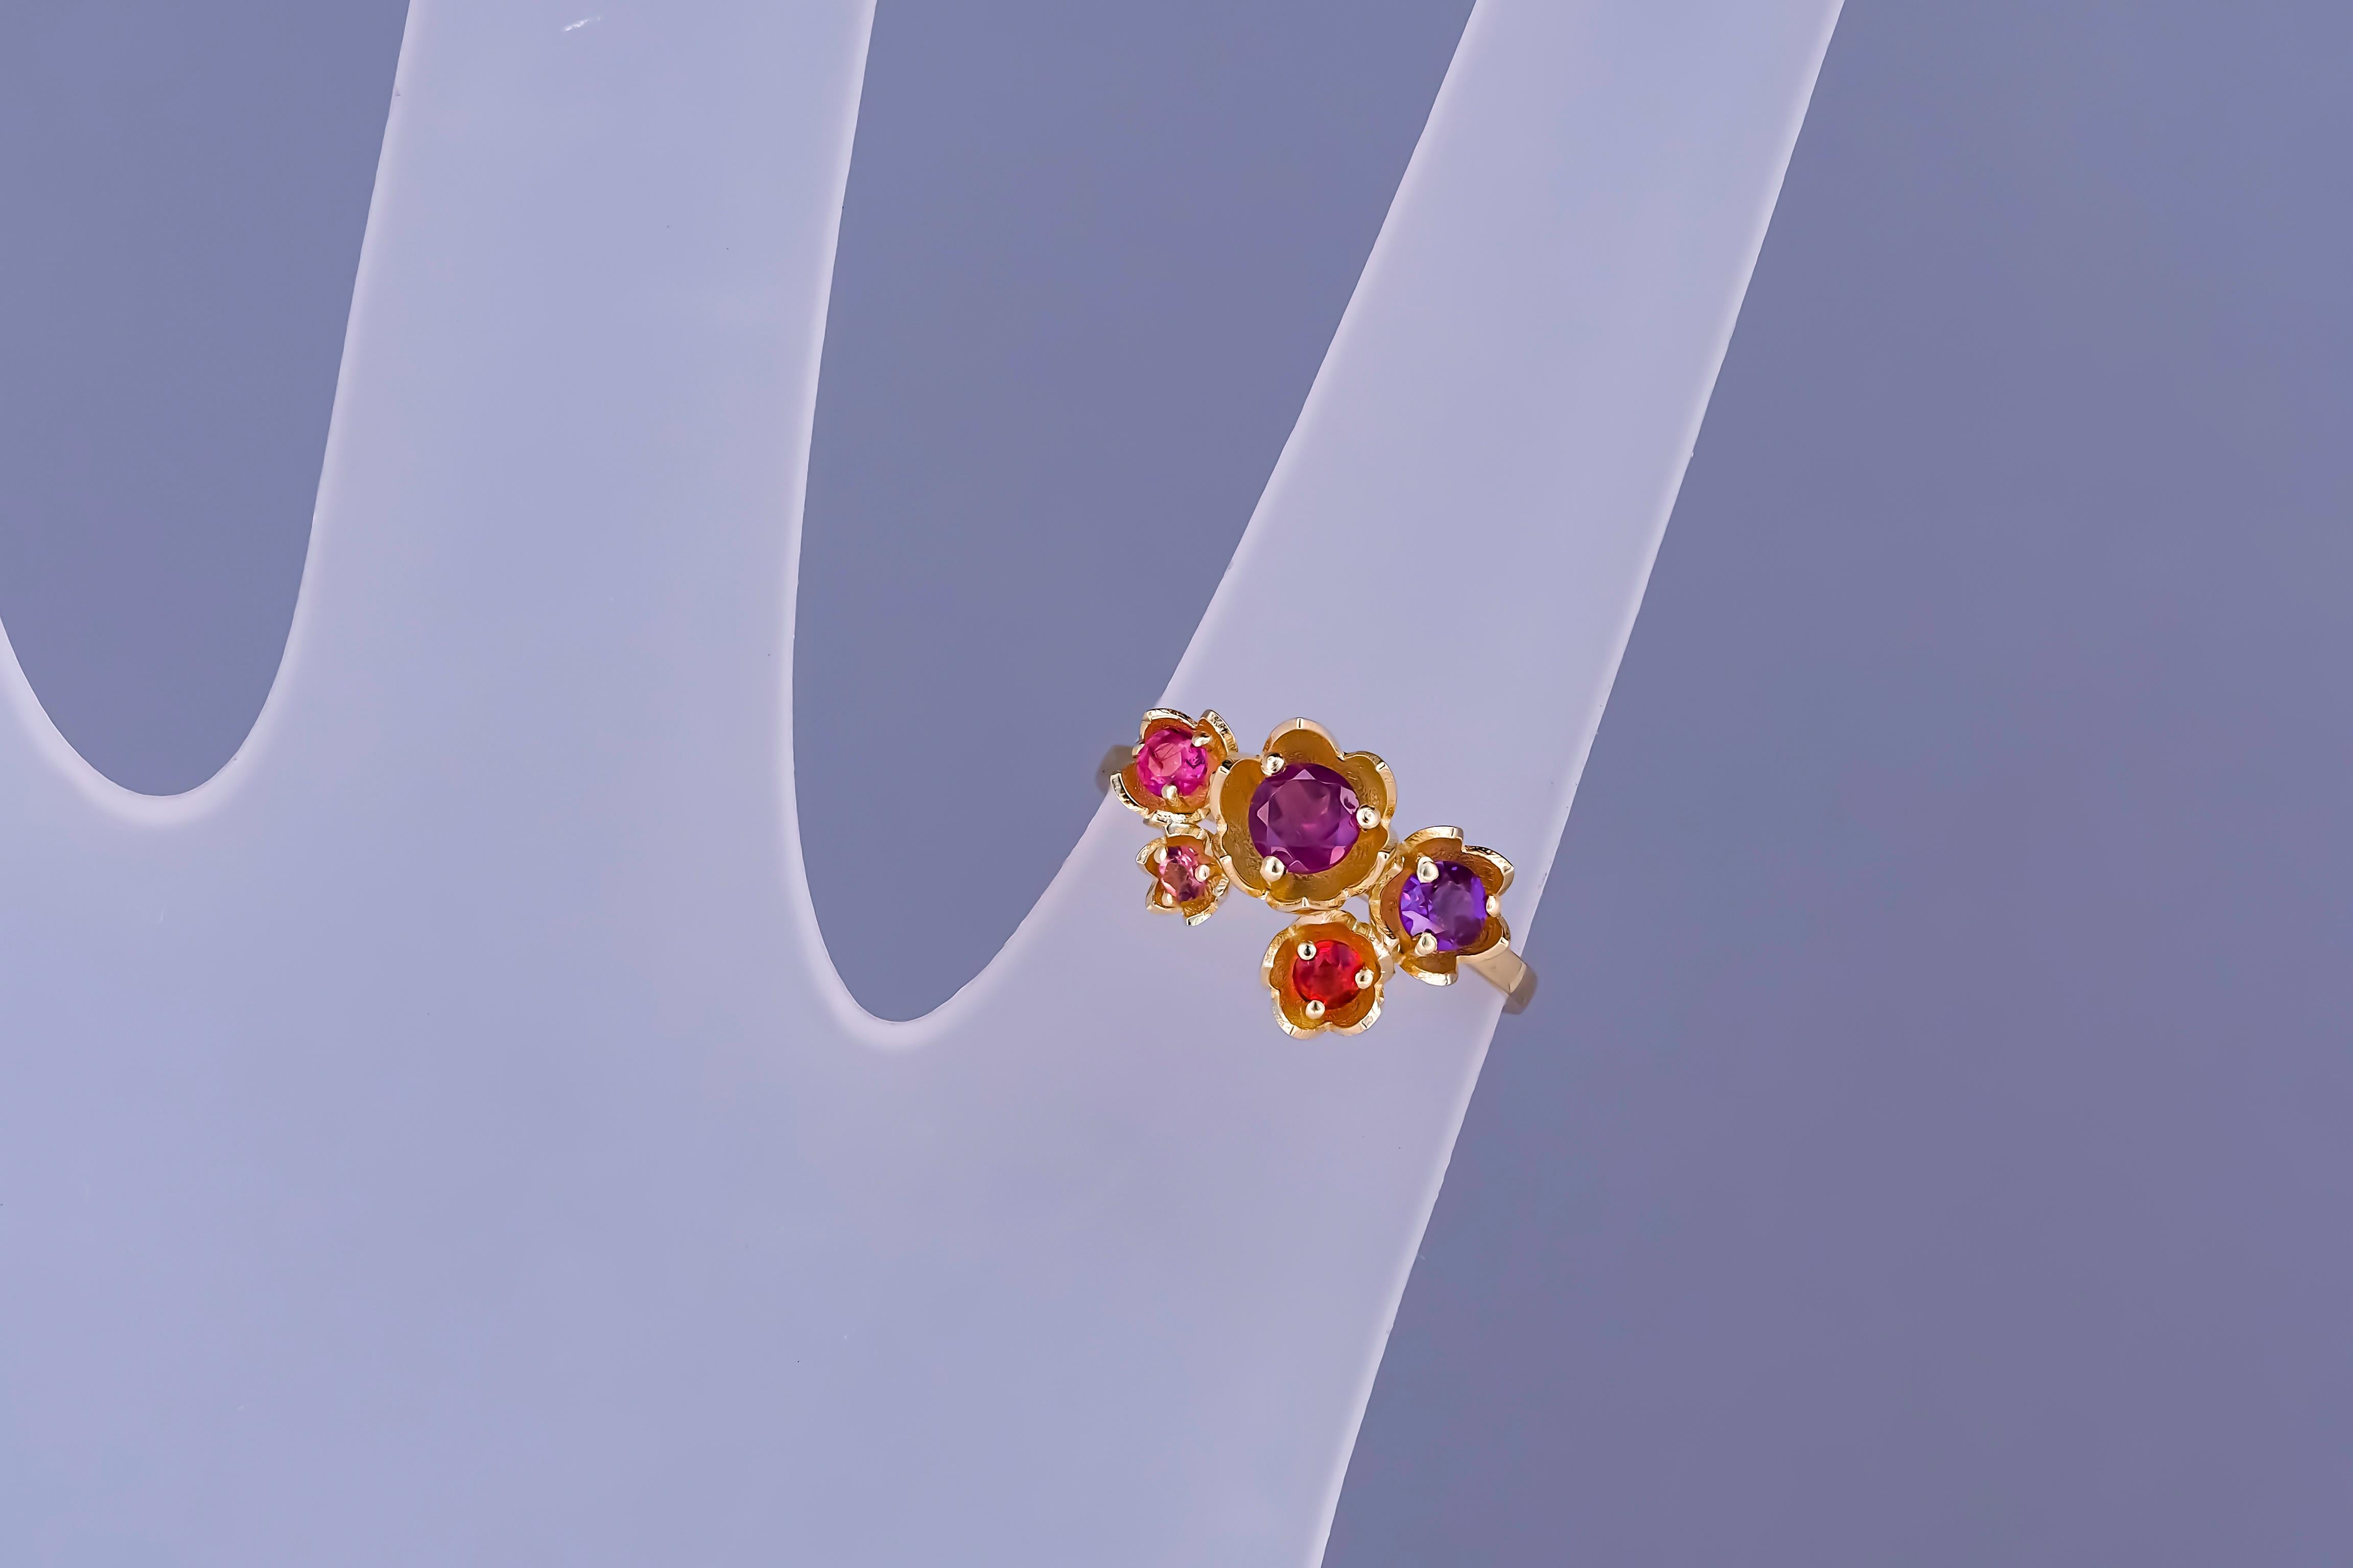 14 Karat Gold Blossom Ring with Multicolored Gemstones, Pink Tourmaline Ring 3